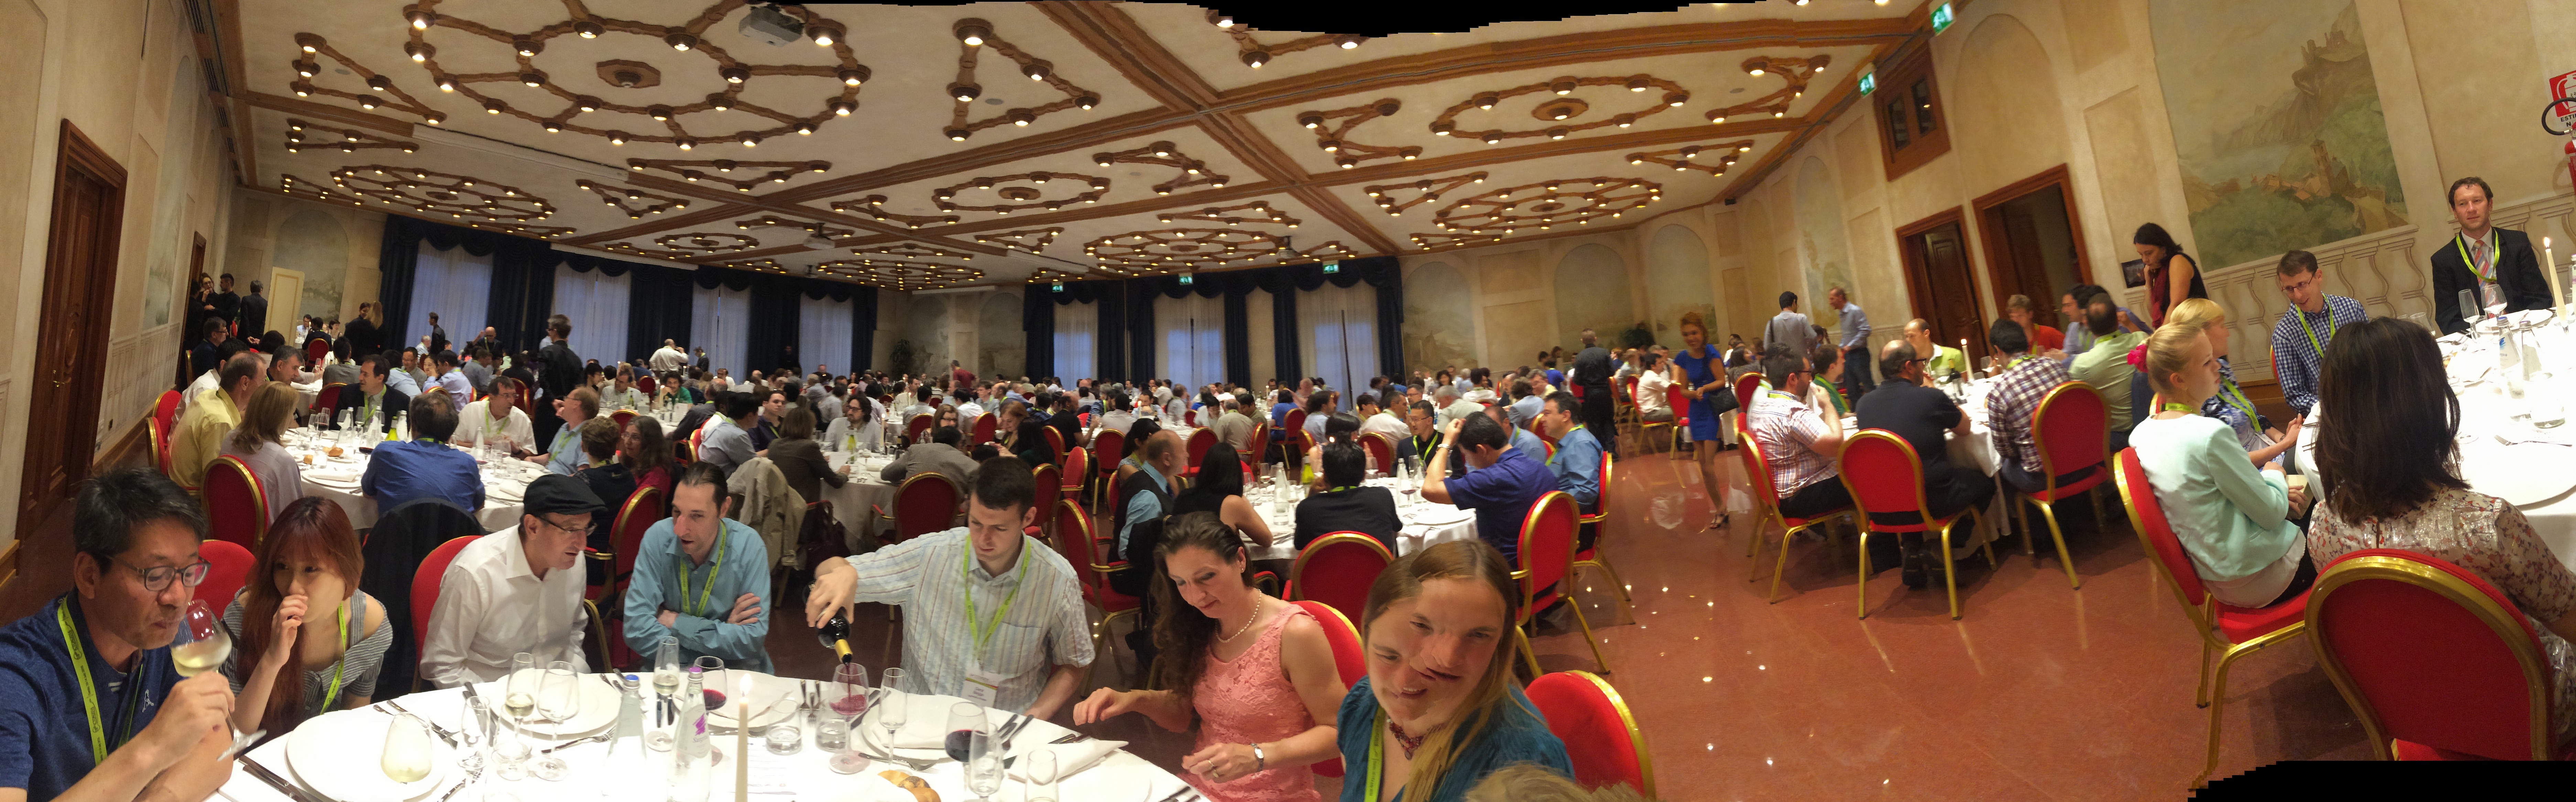 ITCON 2016 conference dinner